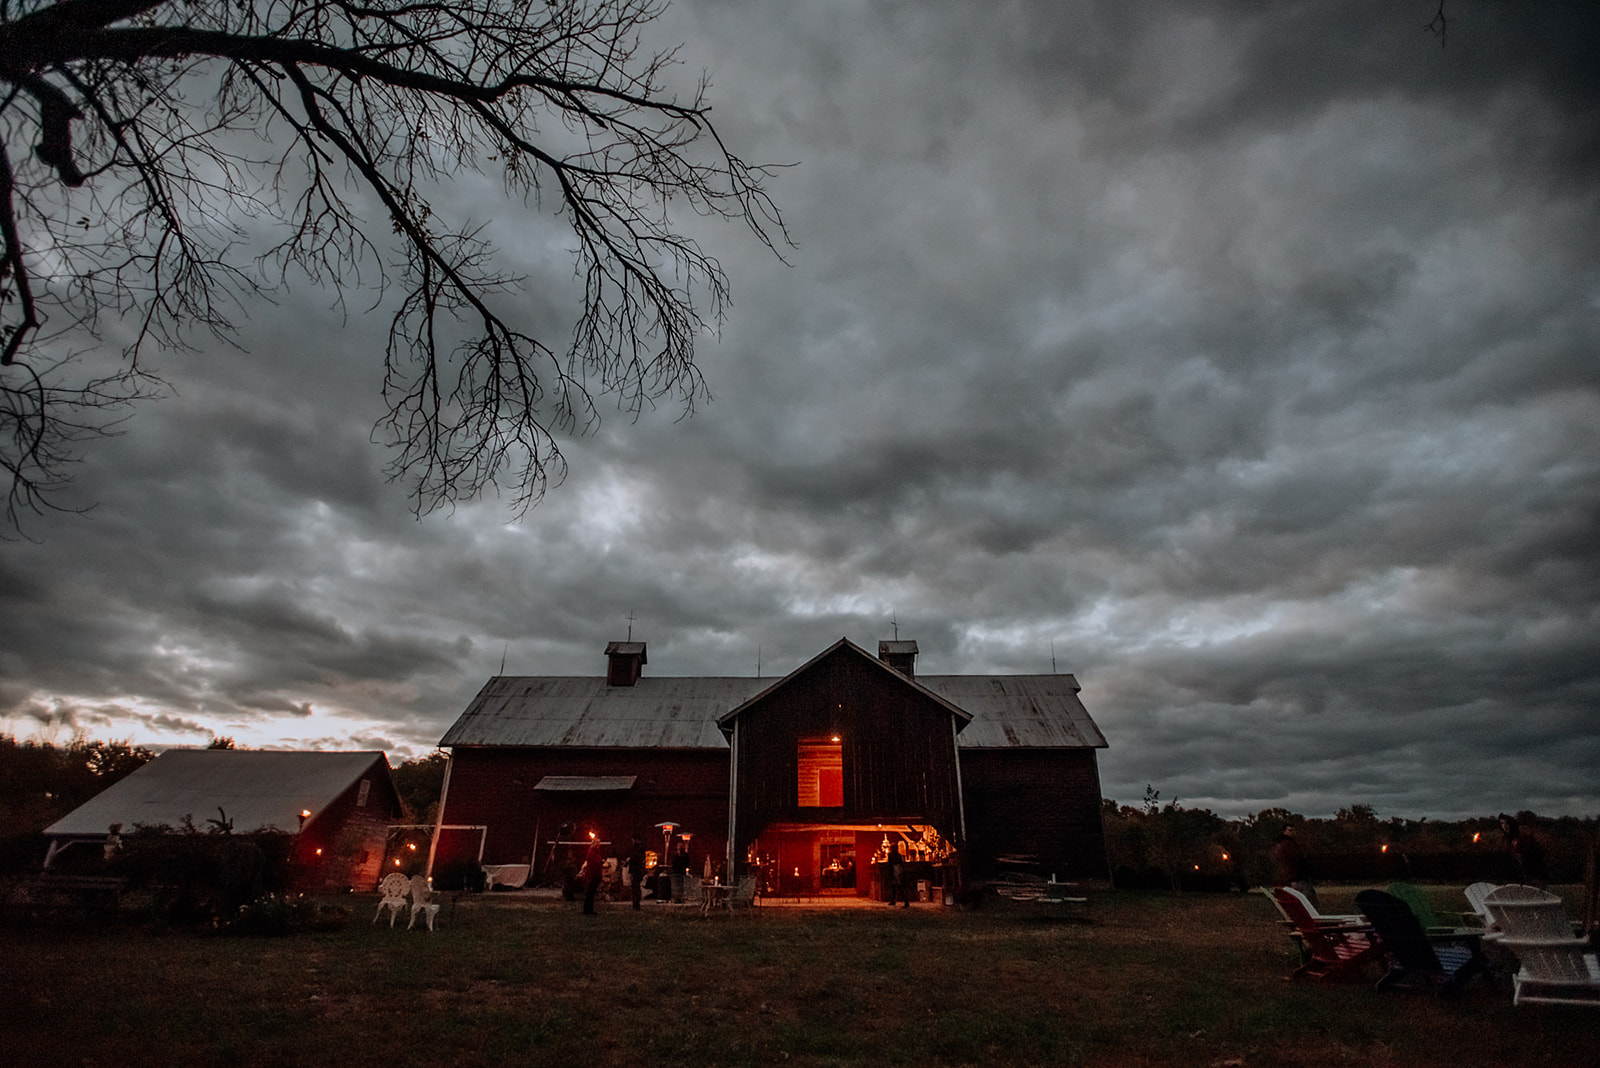 Moody, blue hour, cloudy sky contrasts red barn at dusk with warm orange bistro lights draped inside barn.